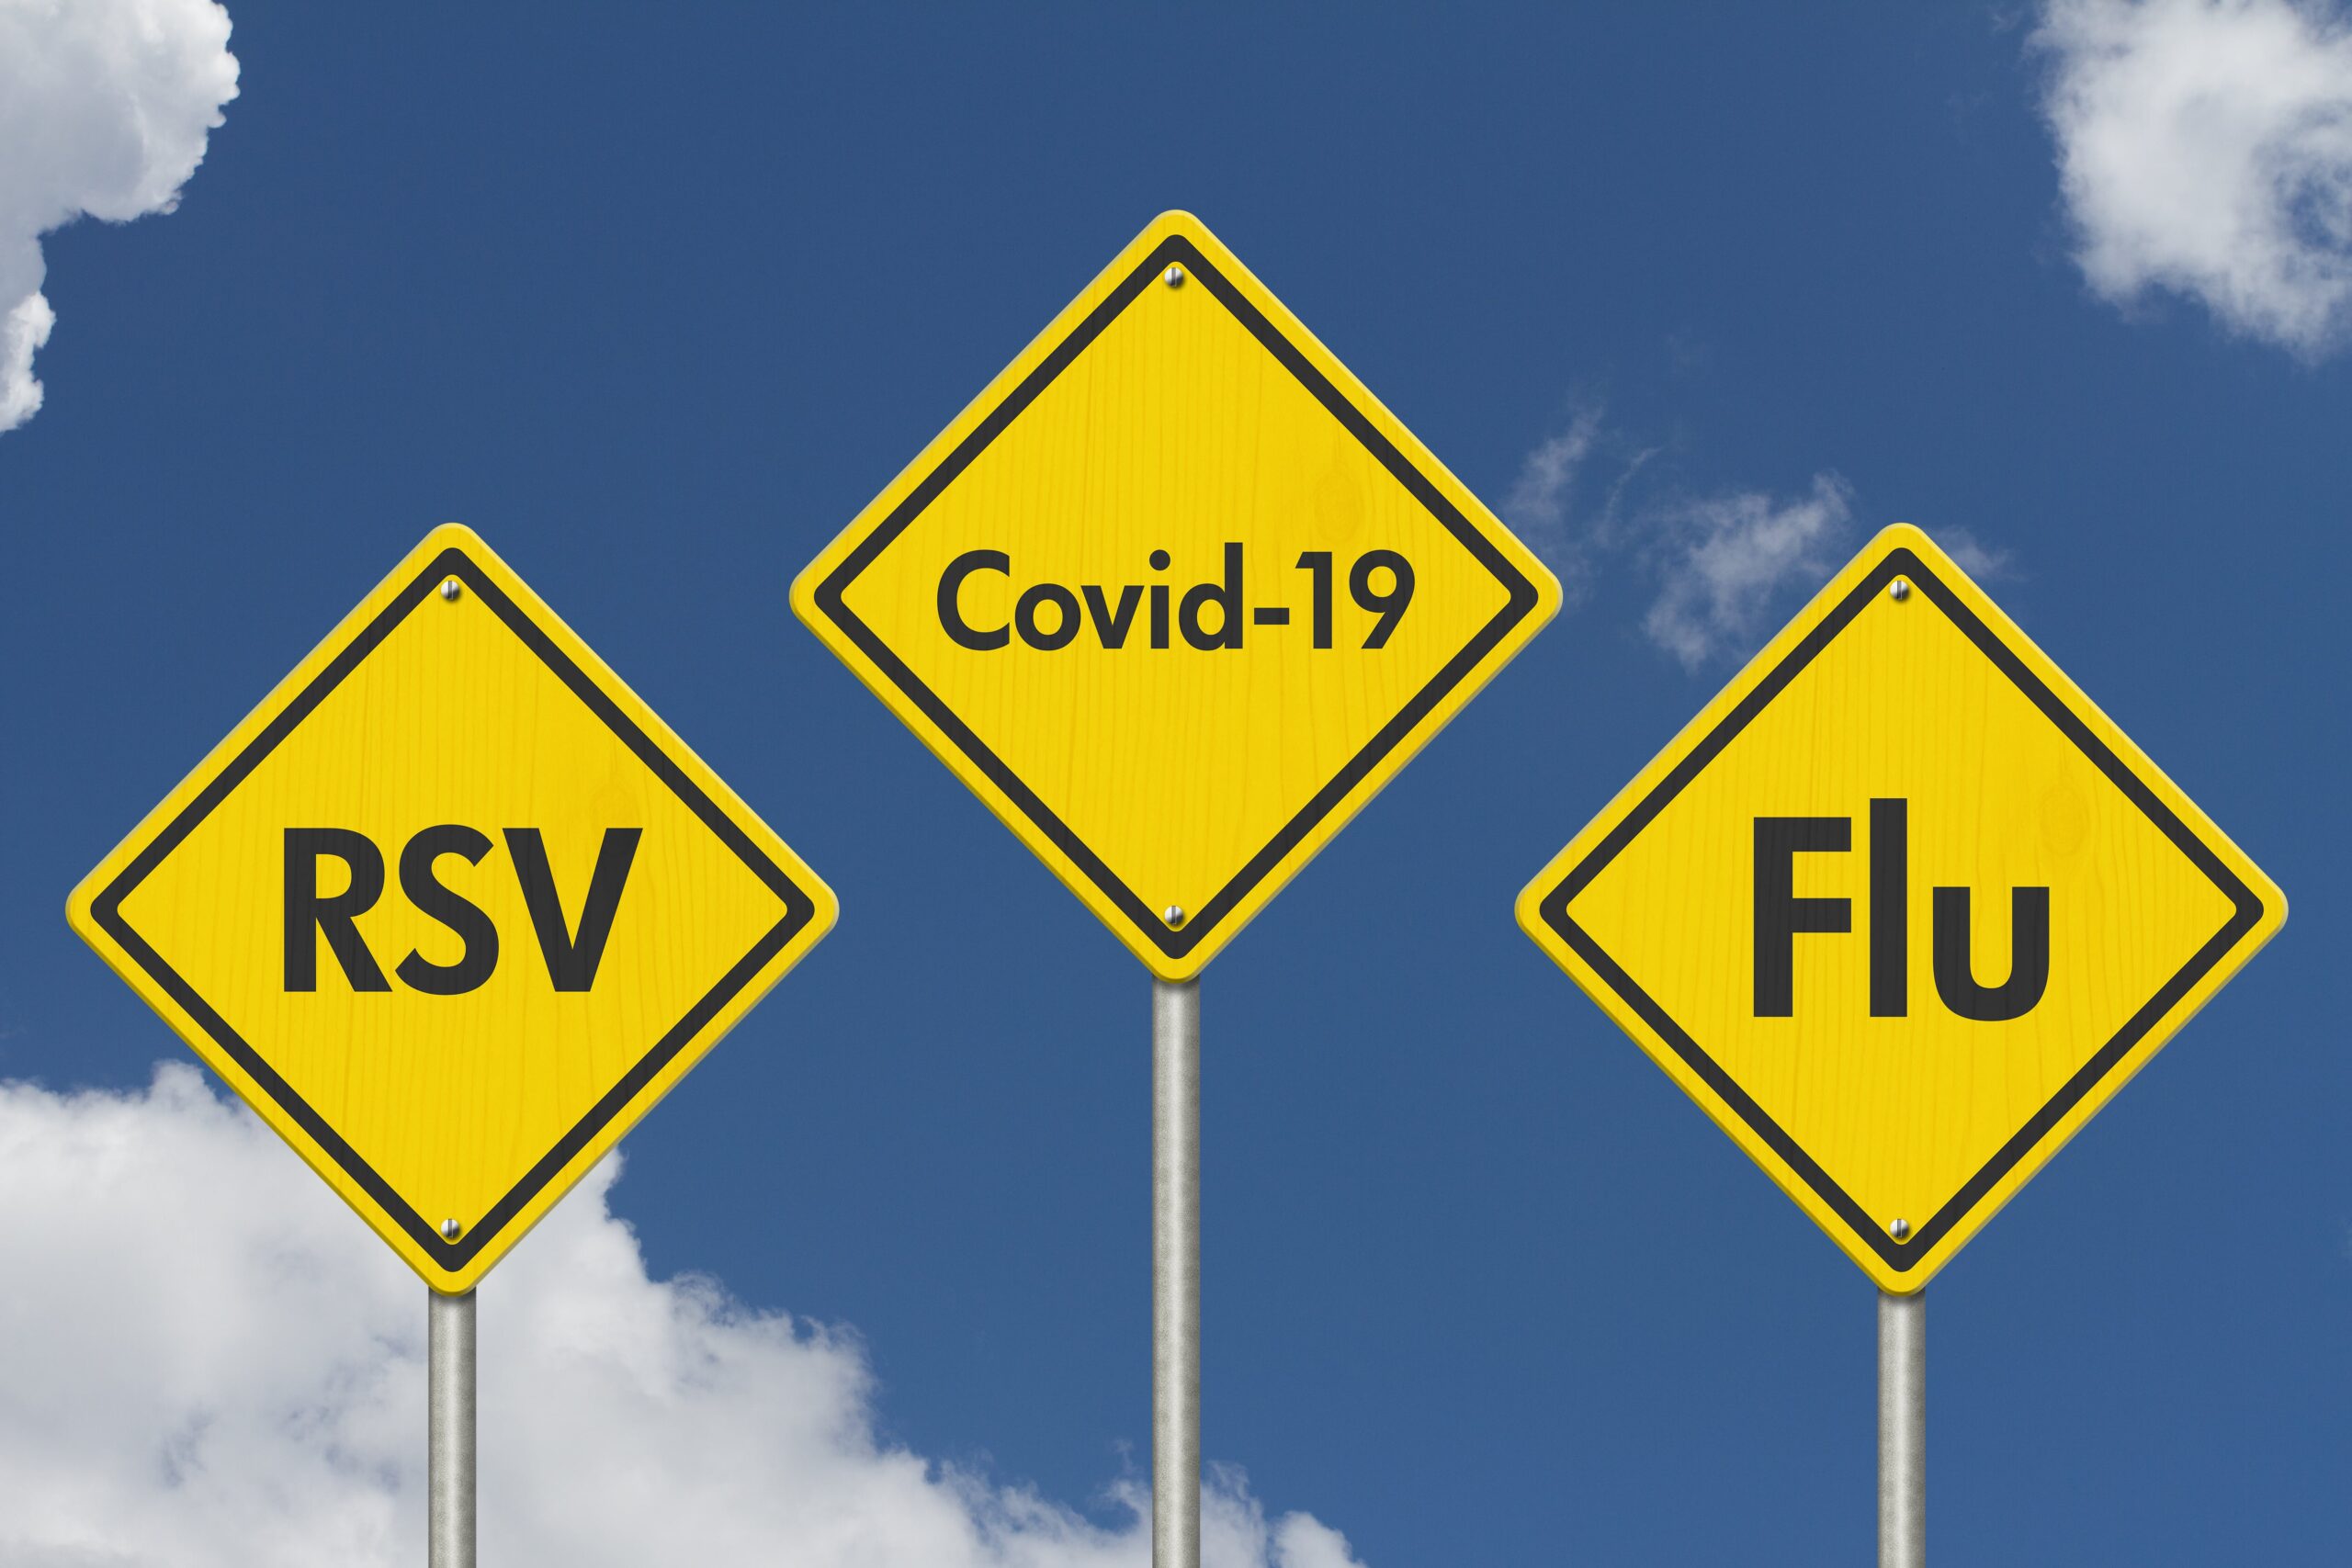 RSV Covid 19 and Influenza make up what's called the tripledemic